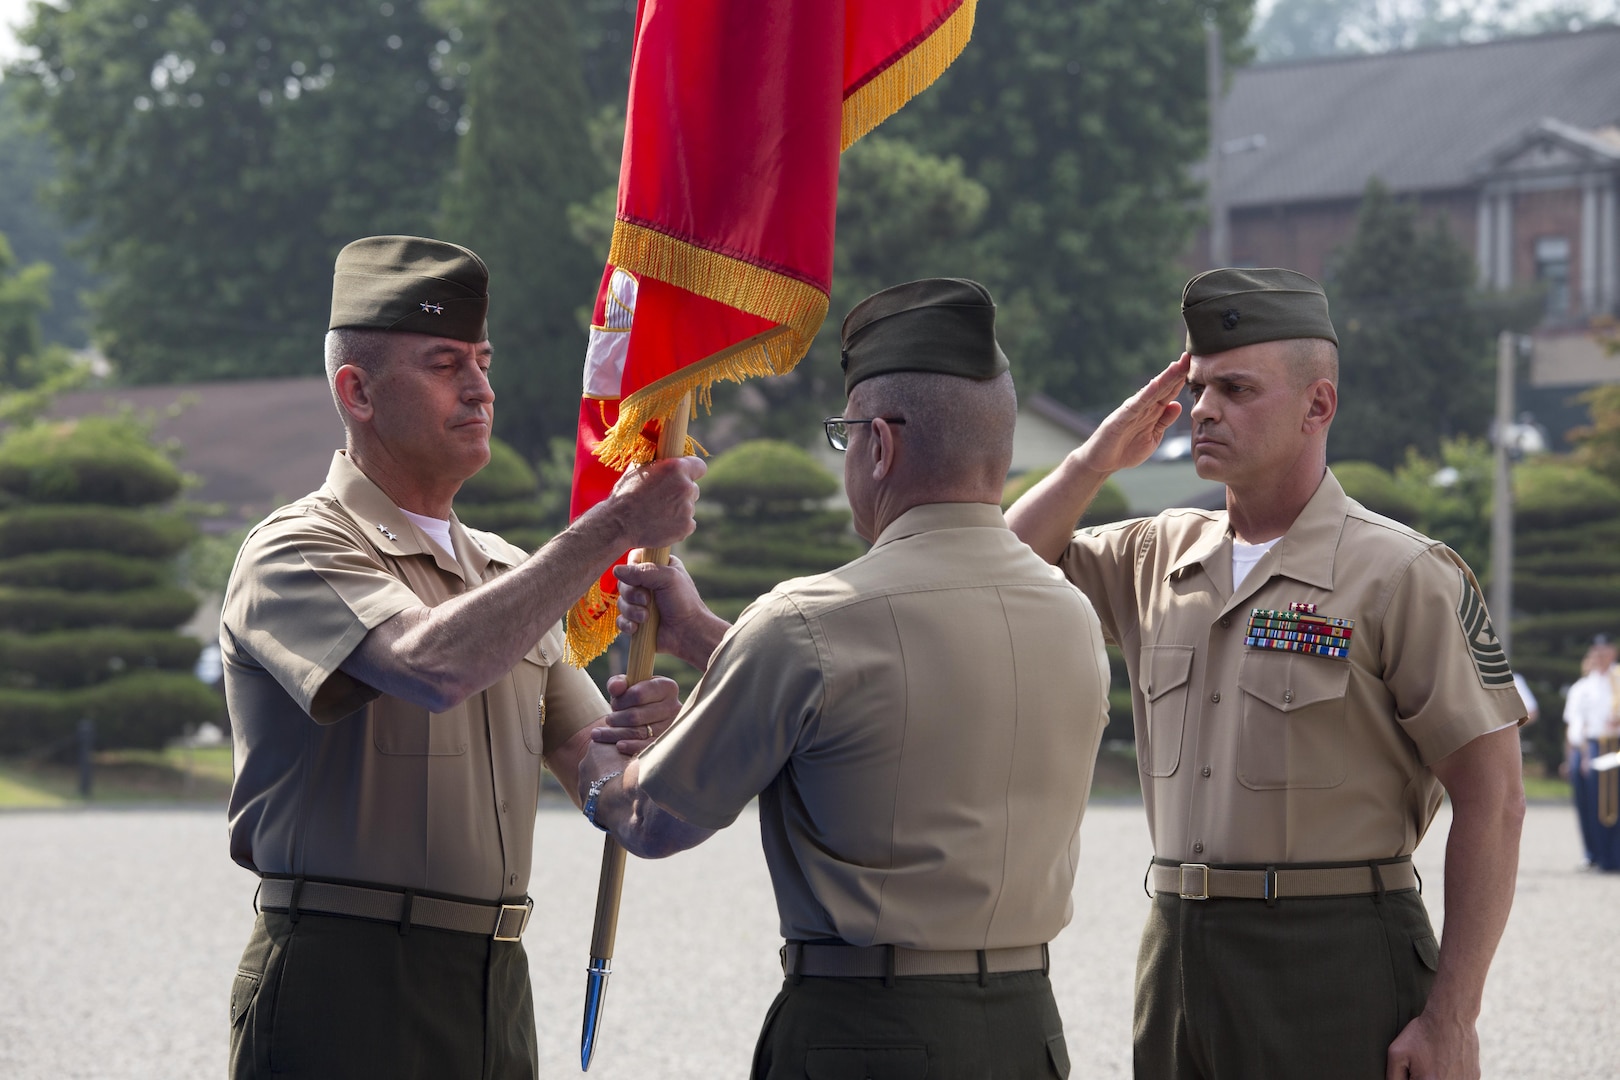 Outgoing U.S. Marine Corps Forces Korea commanding general, Maj. Gen. Robert F. Hedelund (center), passes the colors to his replacement, Maj. Gen. James W. Lukeman in a ceremony at Knight Field, Yongsan, South Korea, June 14. Maj. Gen. Hedelund took command in June of 2015, and his next assignment is commanding general of the 2nd Marine Expeditionary Force.